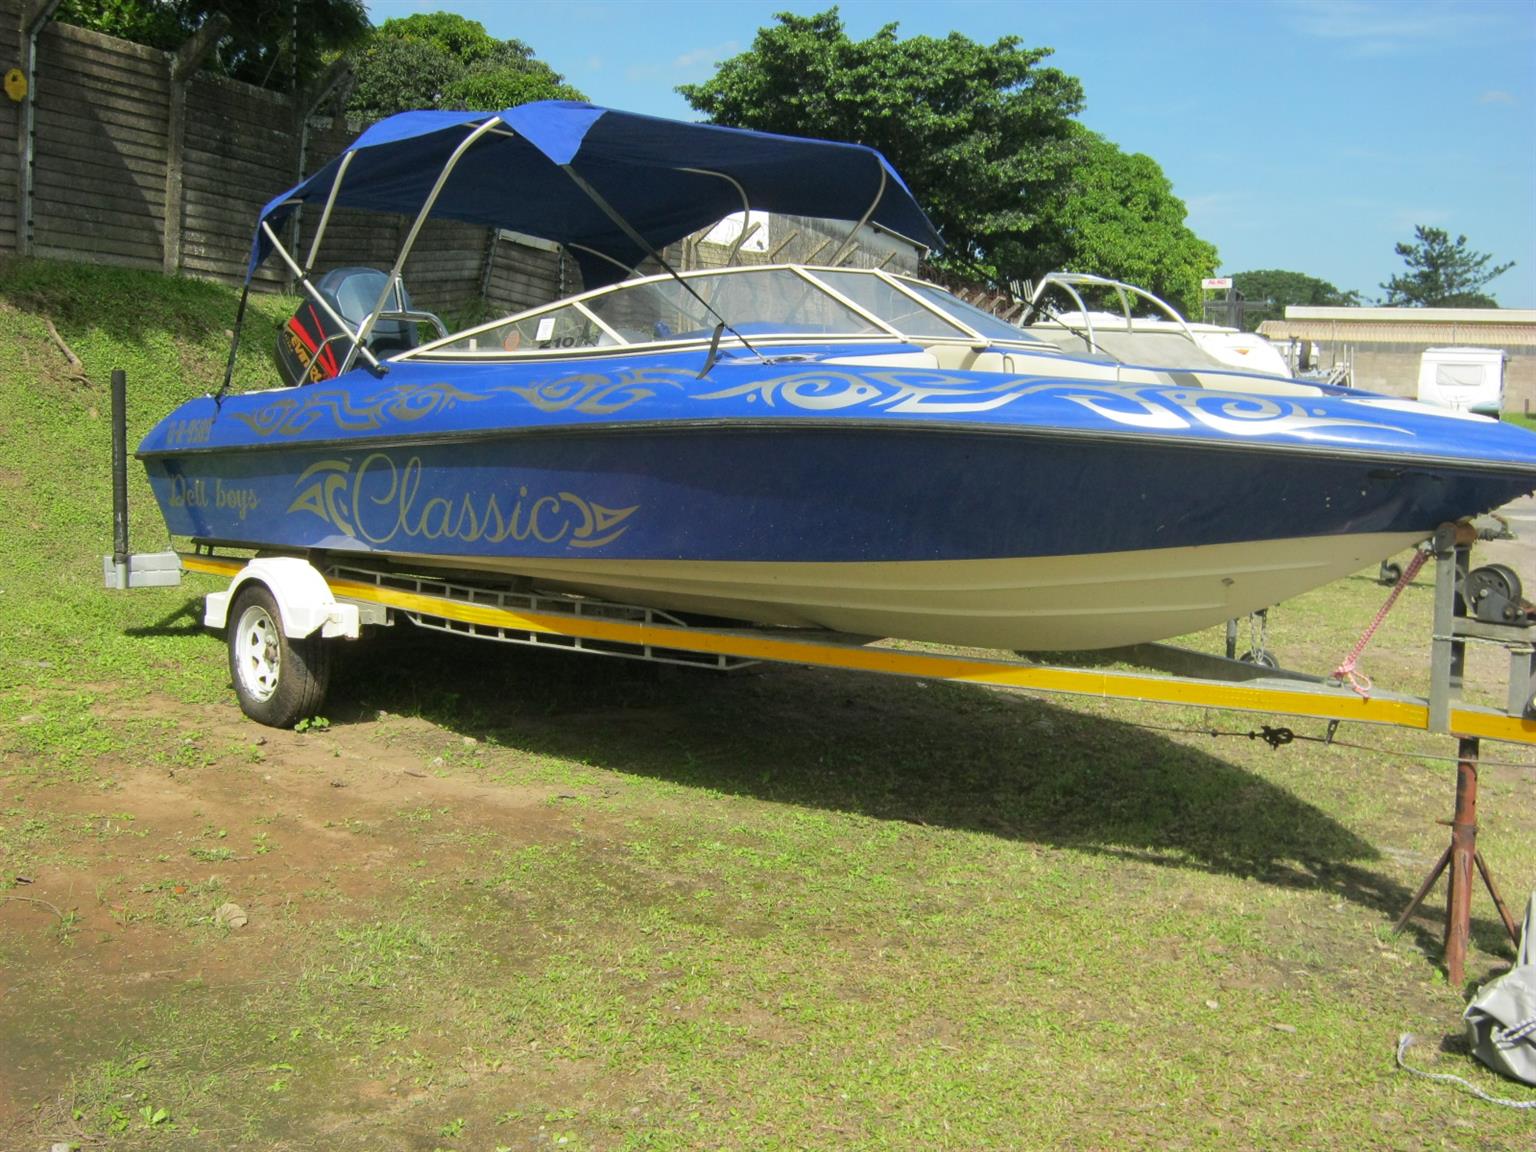 Classic 210 B/R with Evinrude 225HP (Ficht) Motor